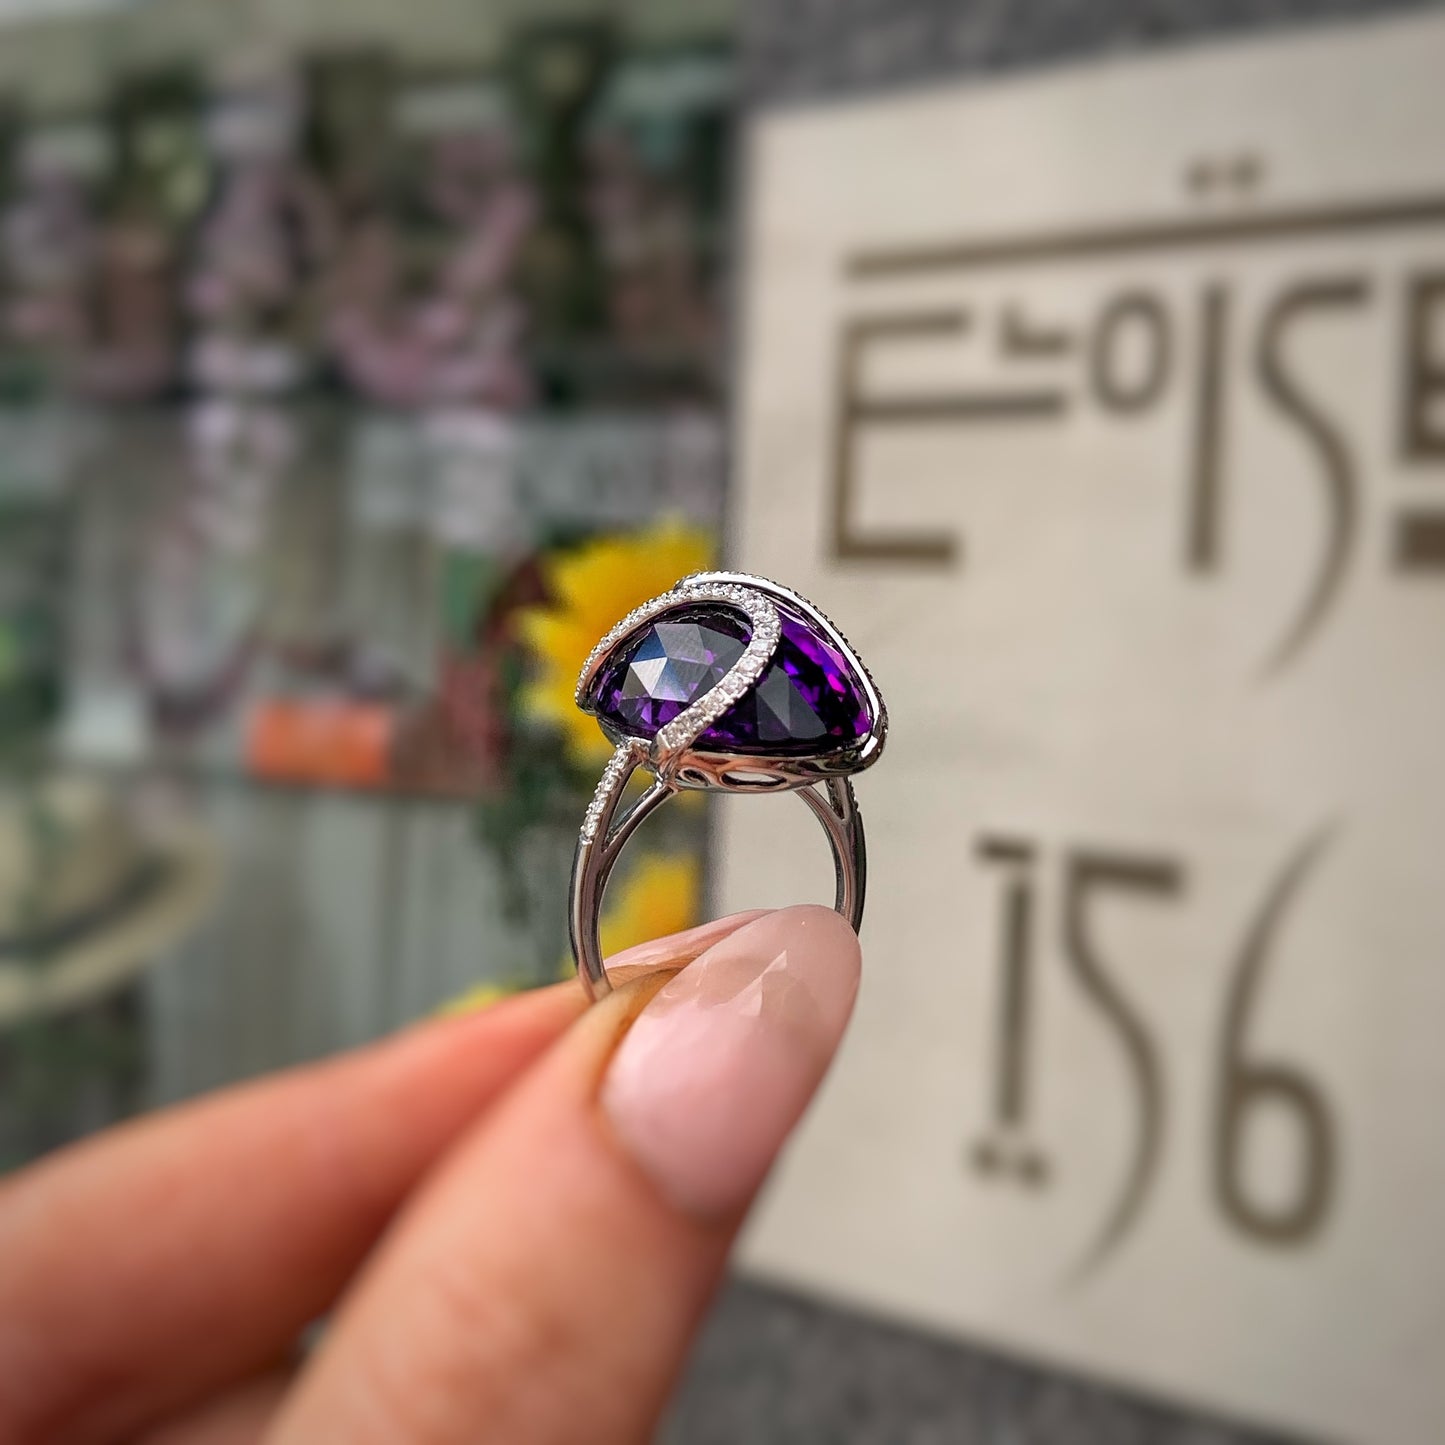 18ct White Gold Amethyst and Diamond Cocktail Ring - SIZE M